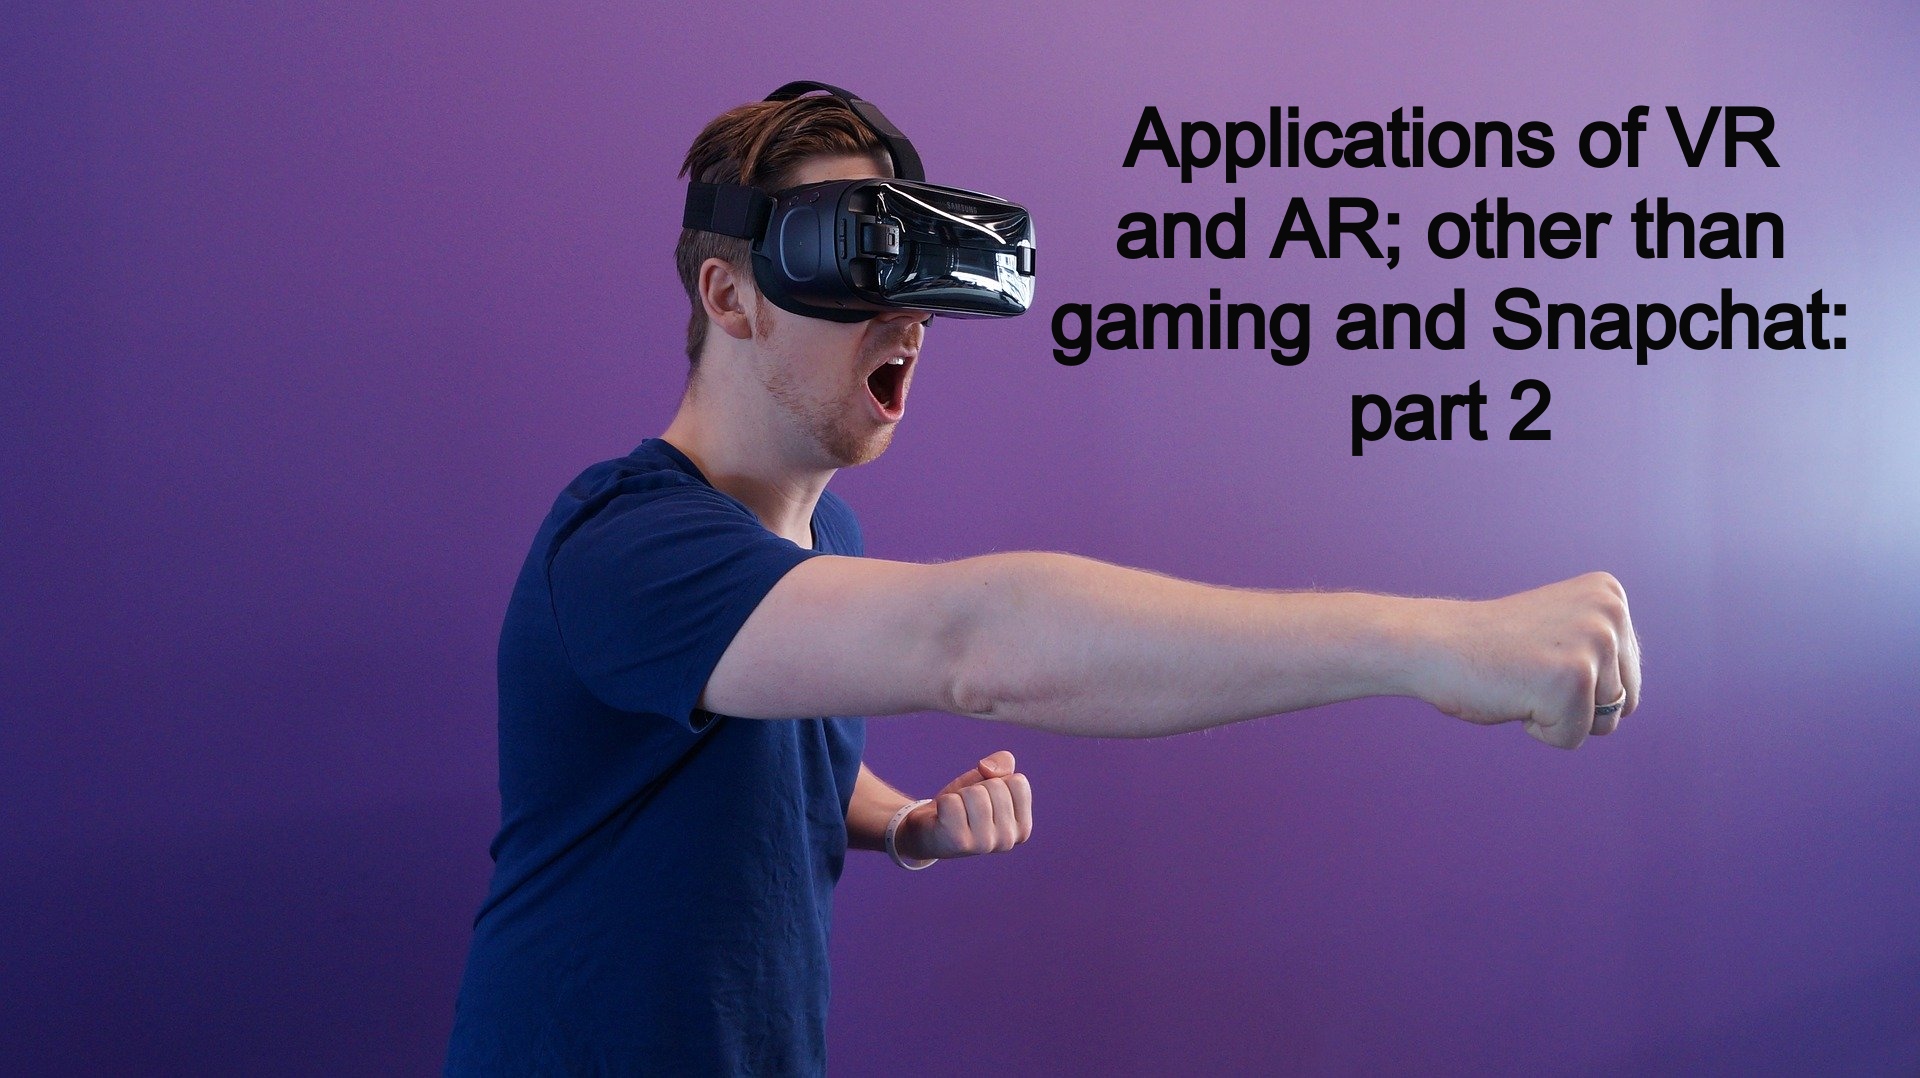 Applications of AR and VR; other than gaming and Snapchat: part 2